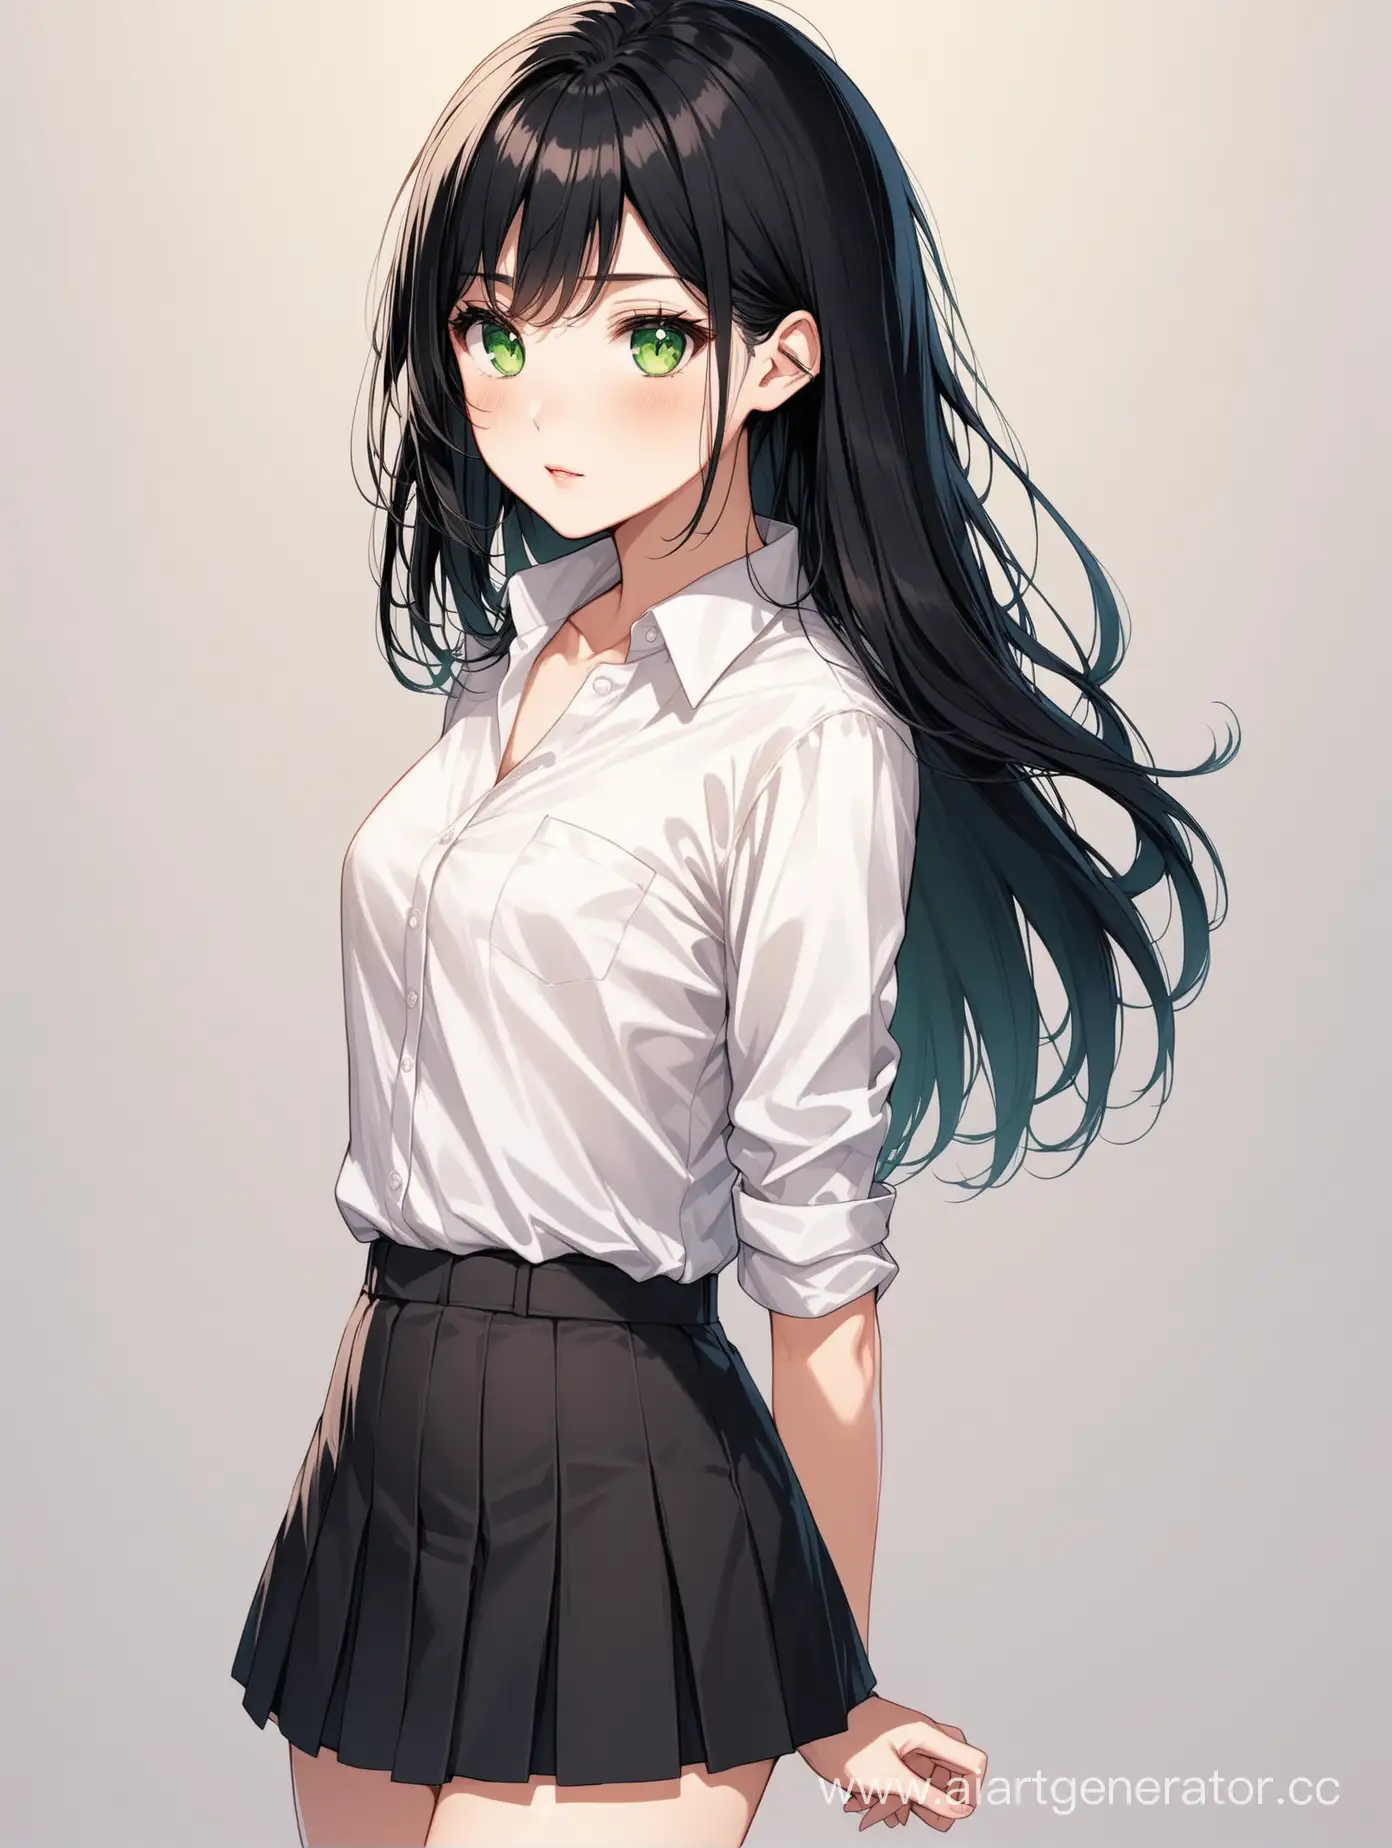 Girl-with-Green-Eyes-and-Black-Hair-in-Stylish-Outfit